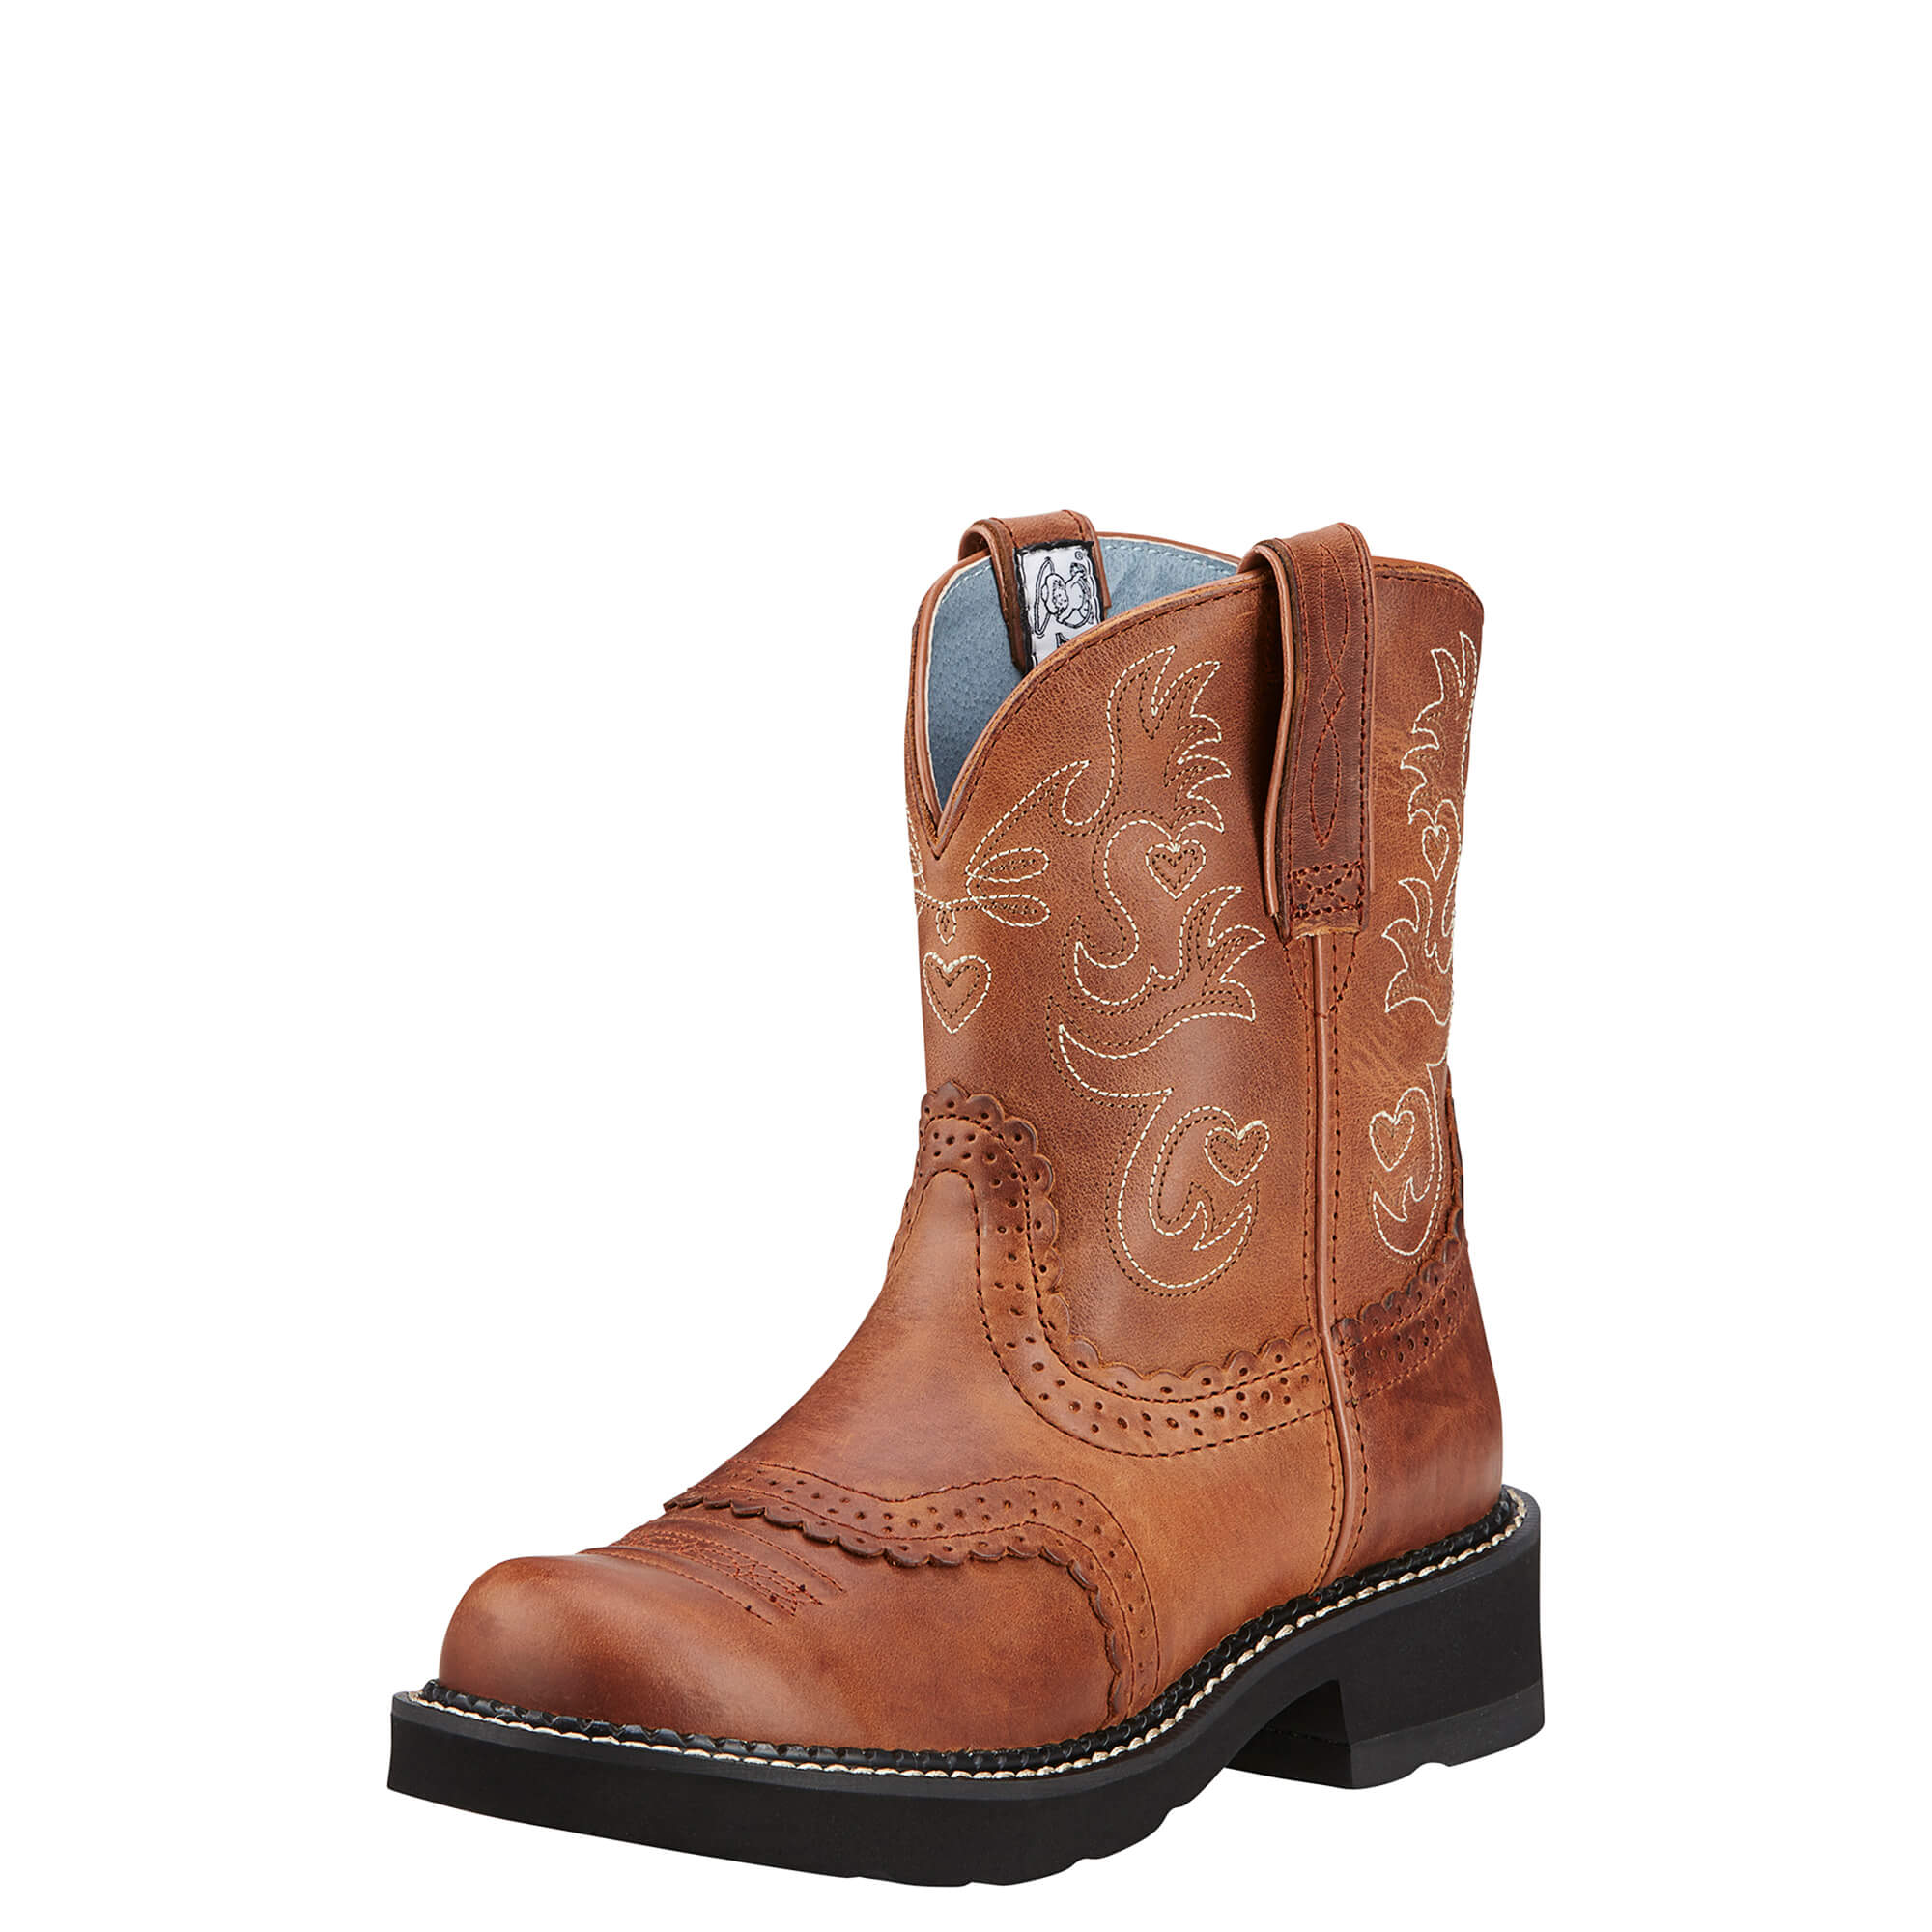 Are Ariat Fatbaby Boots Good for Riding?